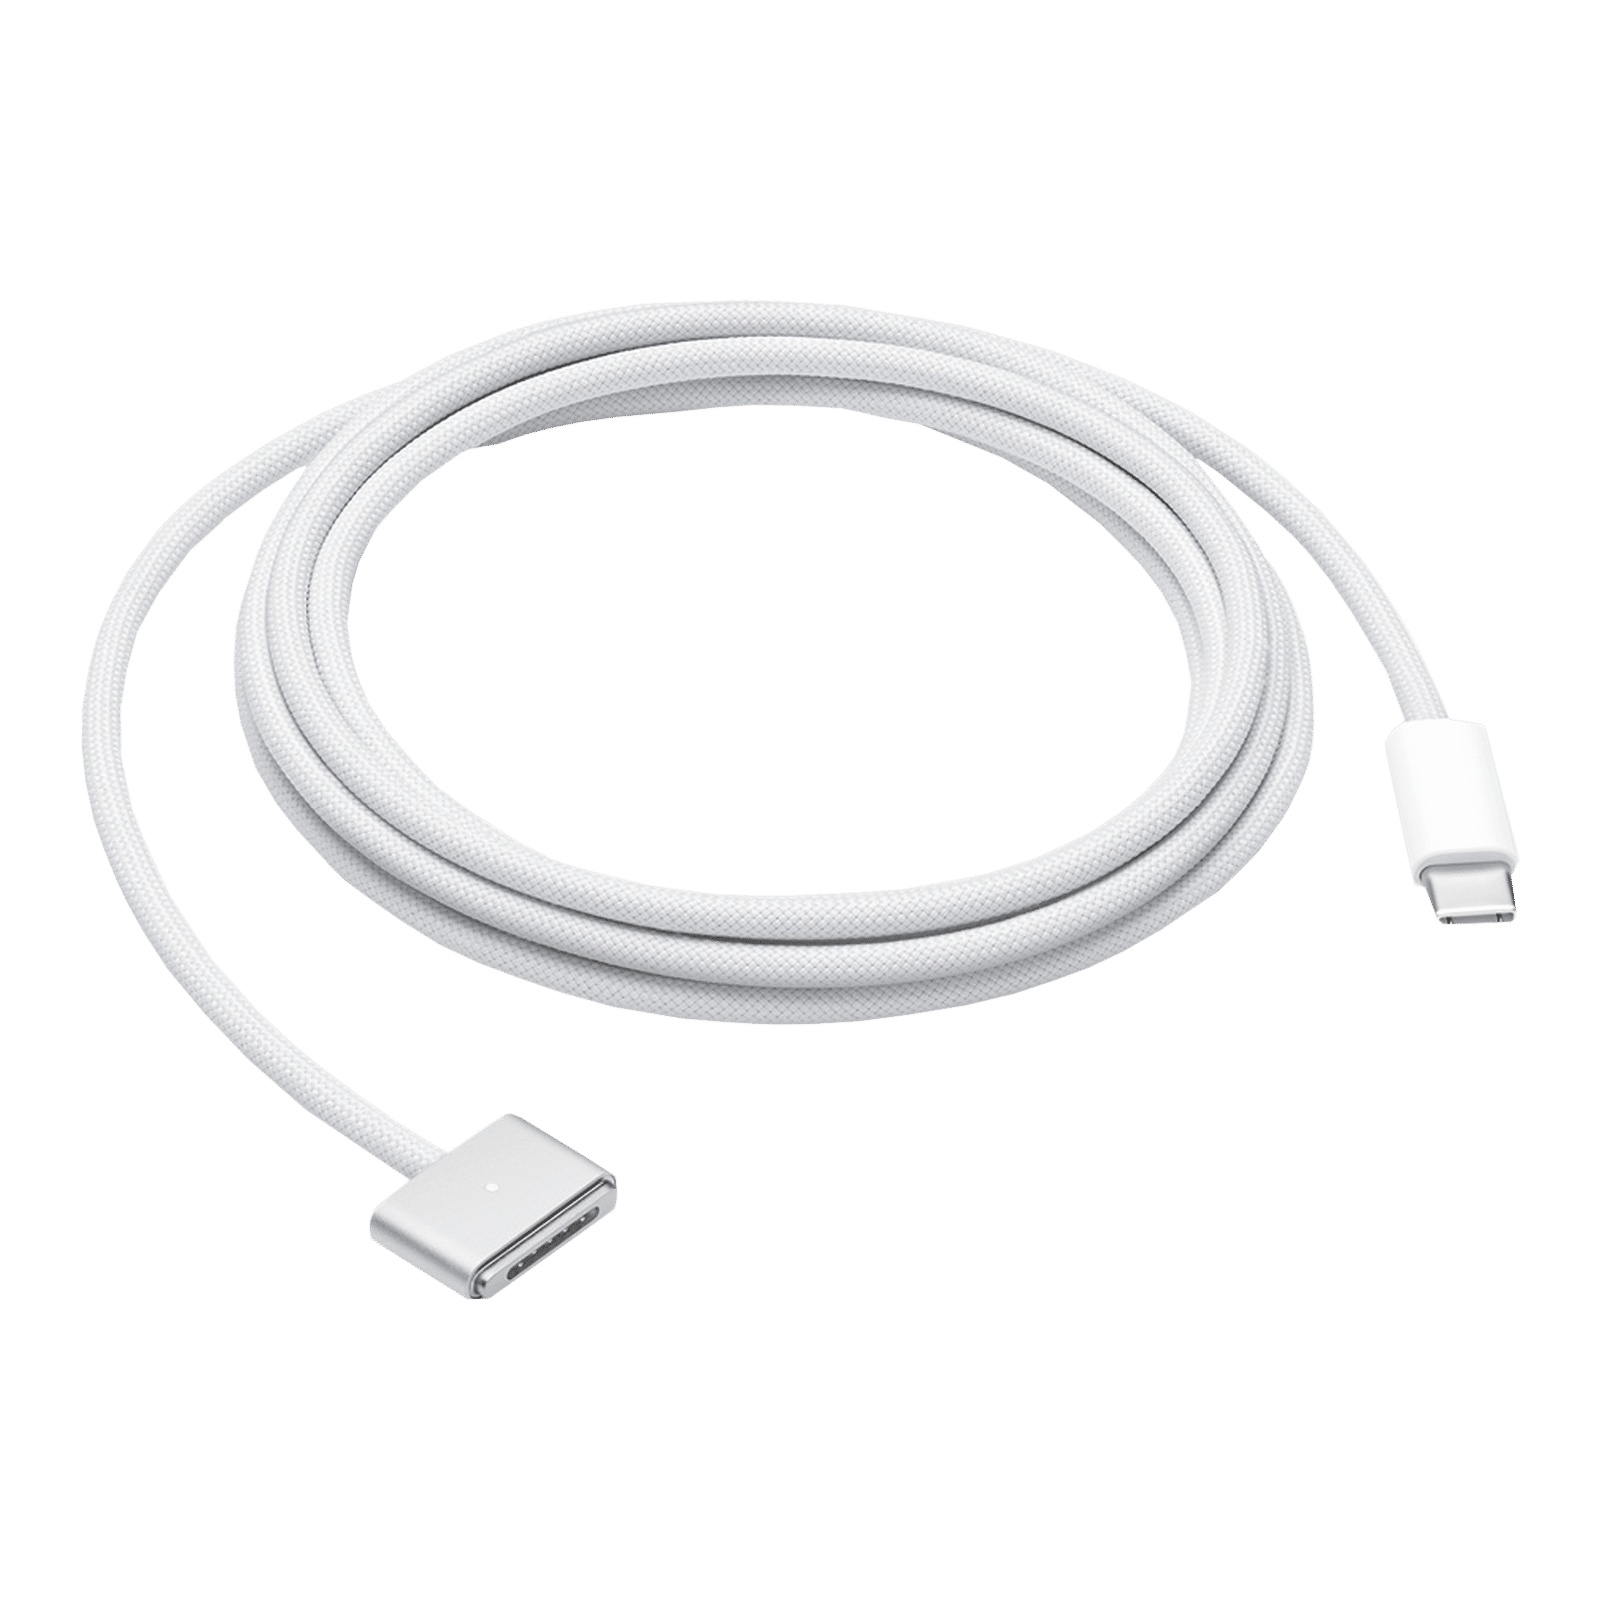  Buy Apple MagSafe to MagSafe 2 Converter Online at Low Prices in  India